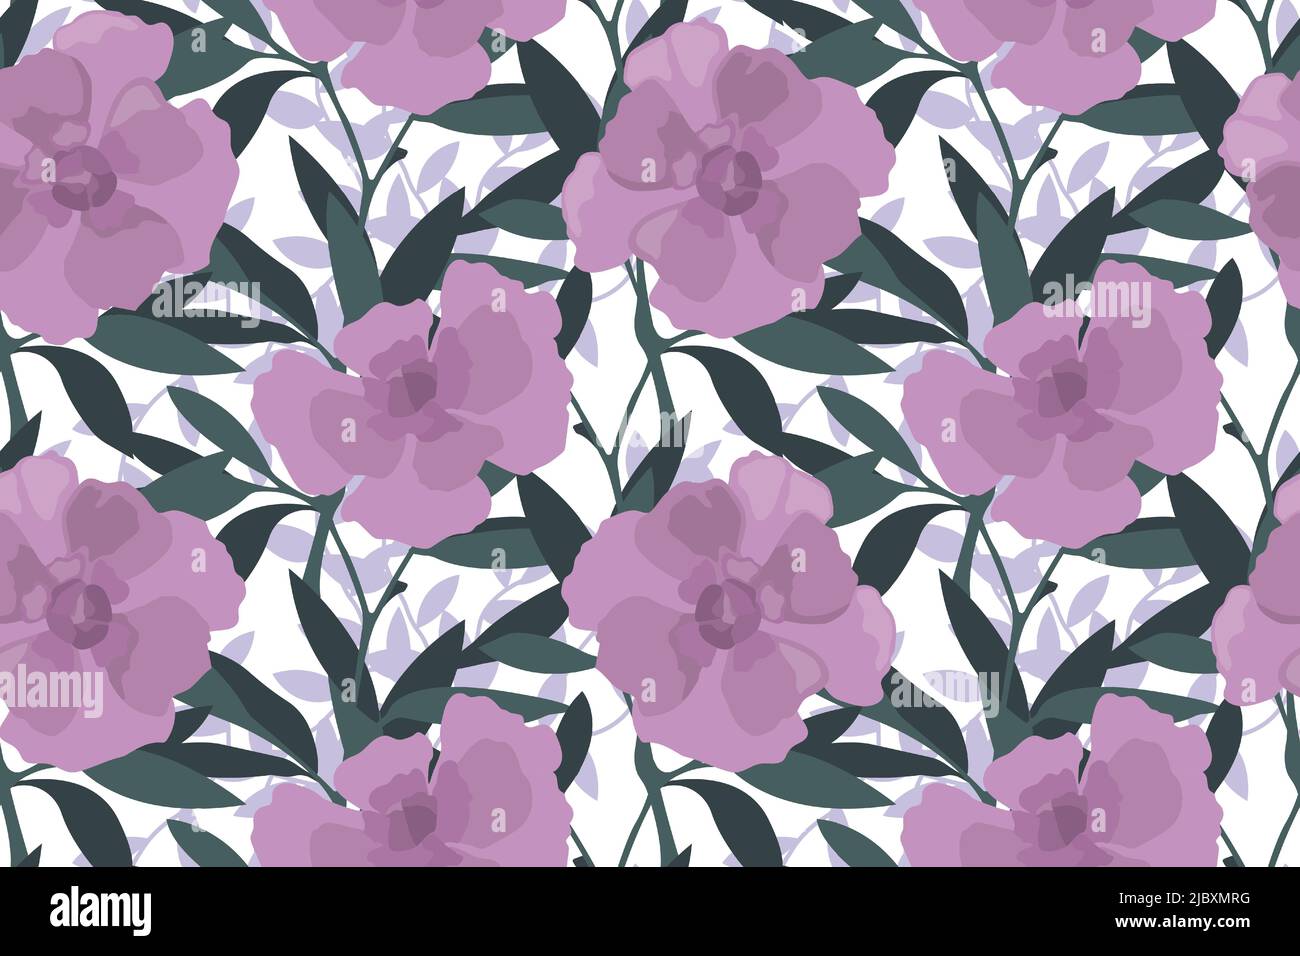 Vector floral seamless pattern. Lilac flowers with green twigs and leaves on a white background. Stock Vector